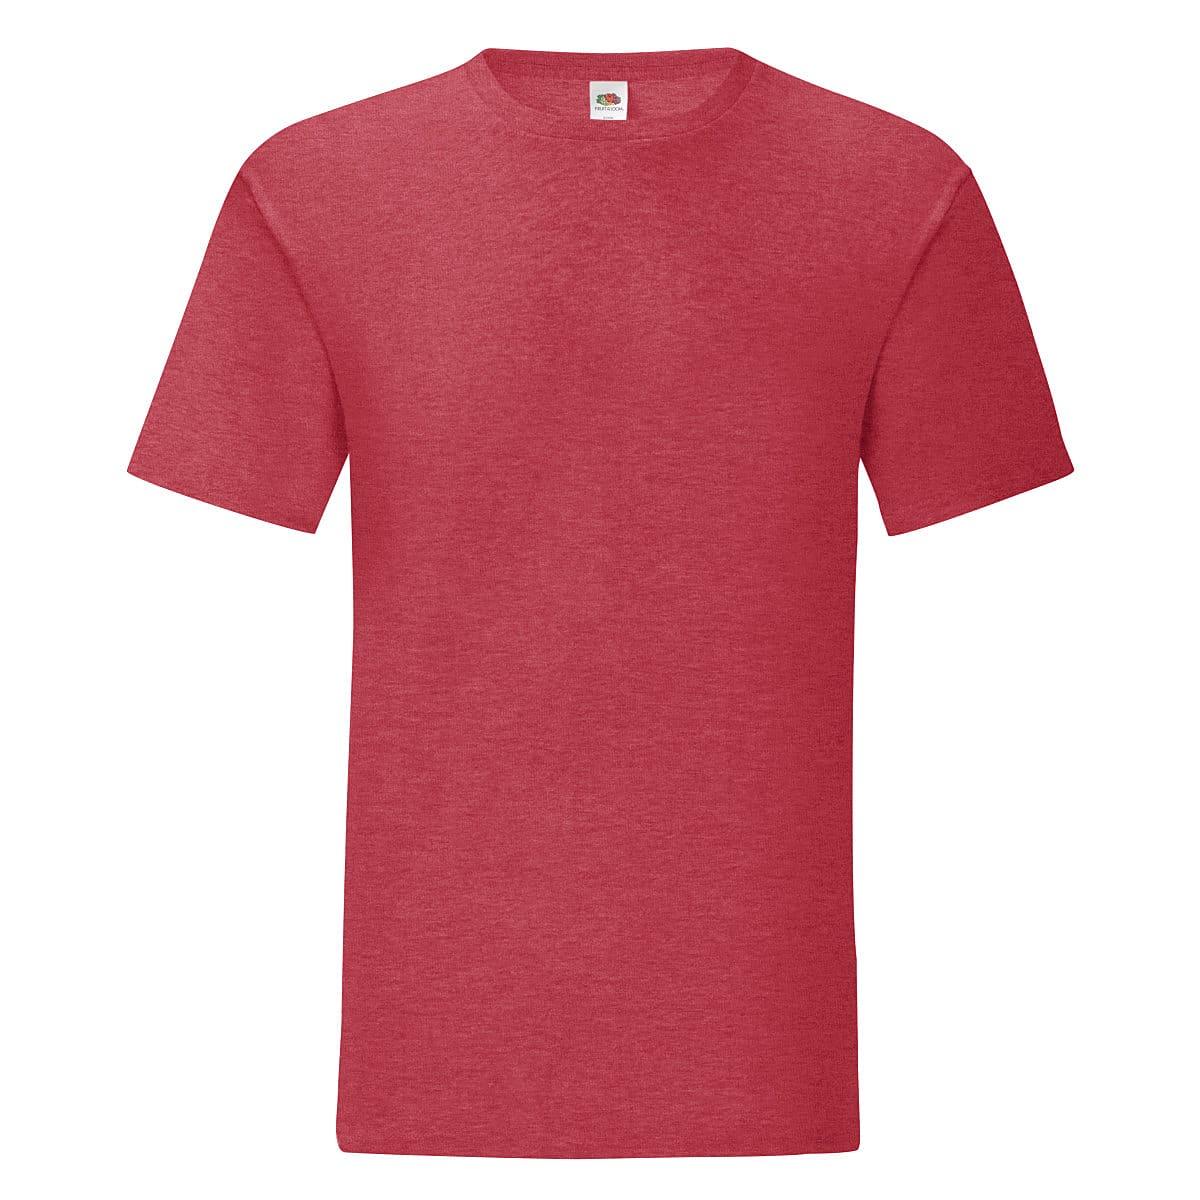 Fruit Of The Loom Mens Iconic T-Shirt in Vintage Heather Red (Product Code: 61430)